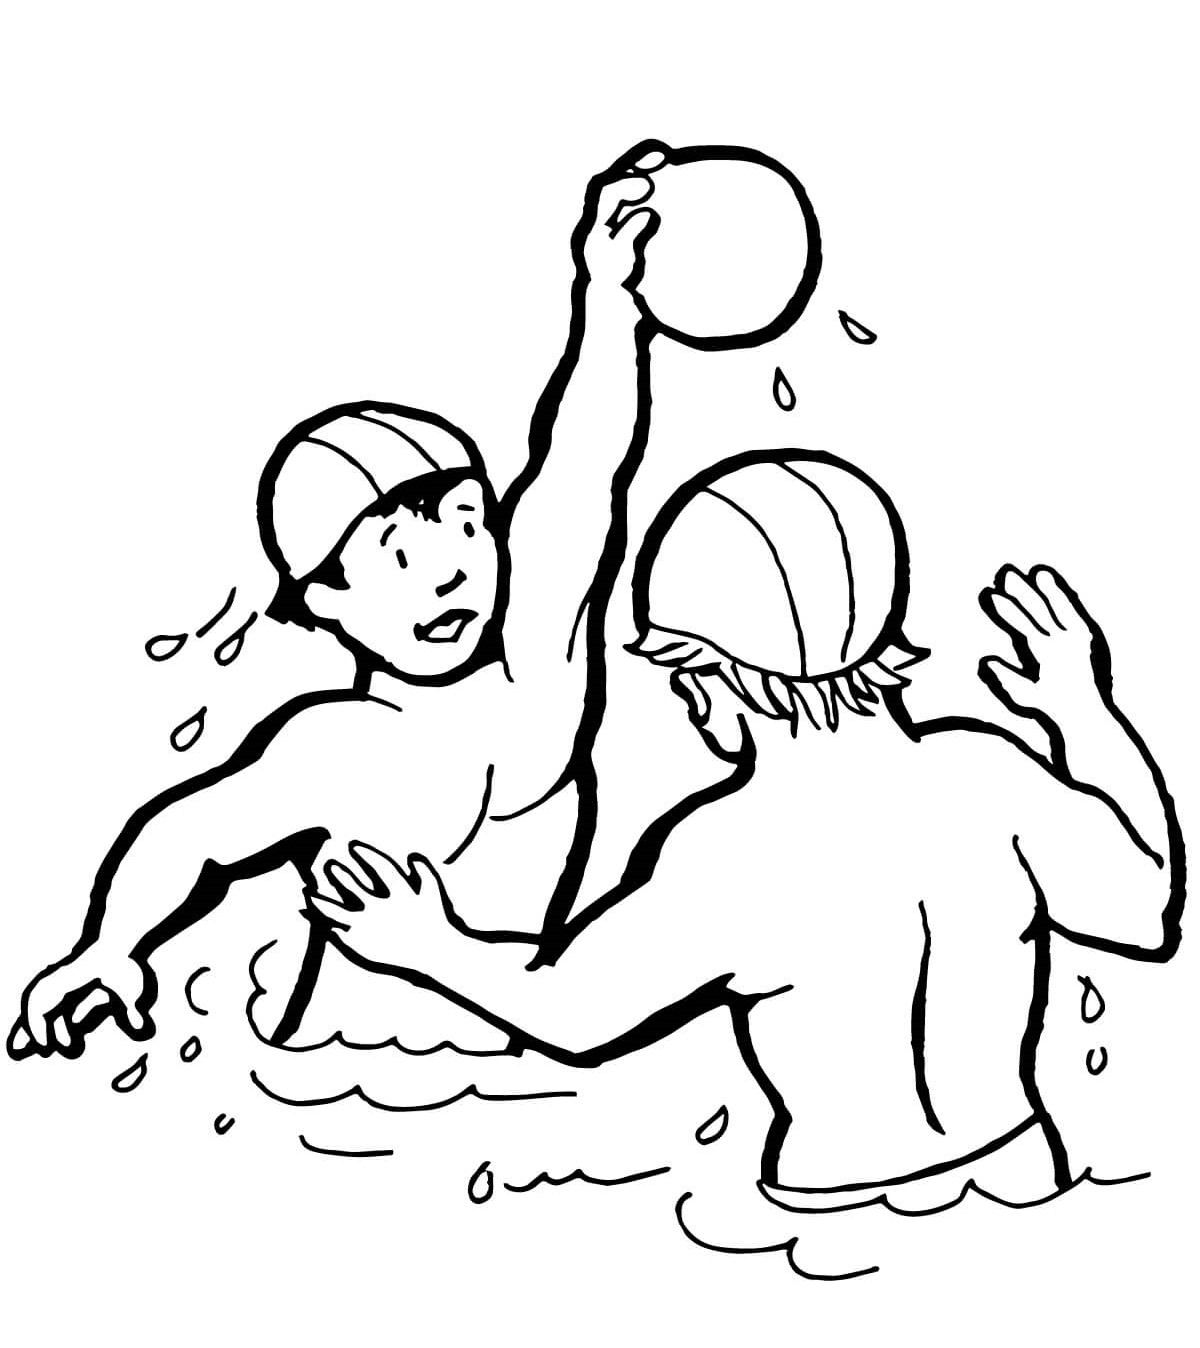 Water polo swimming